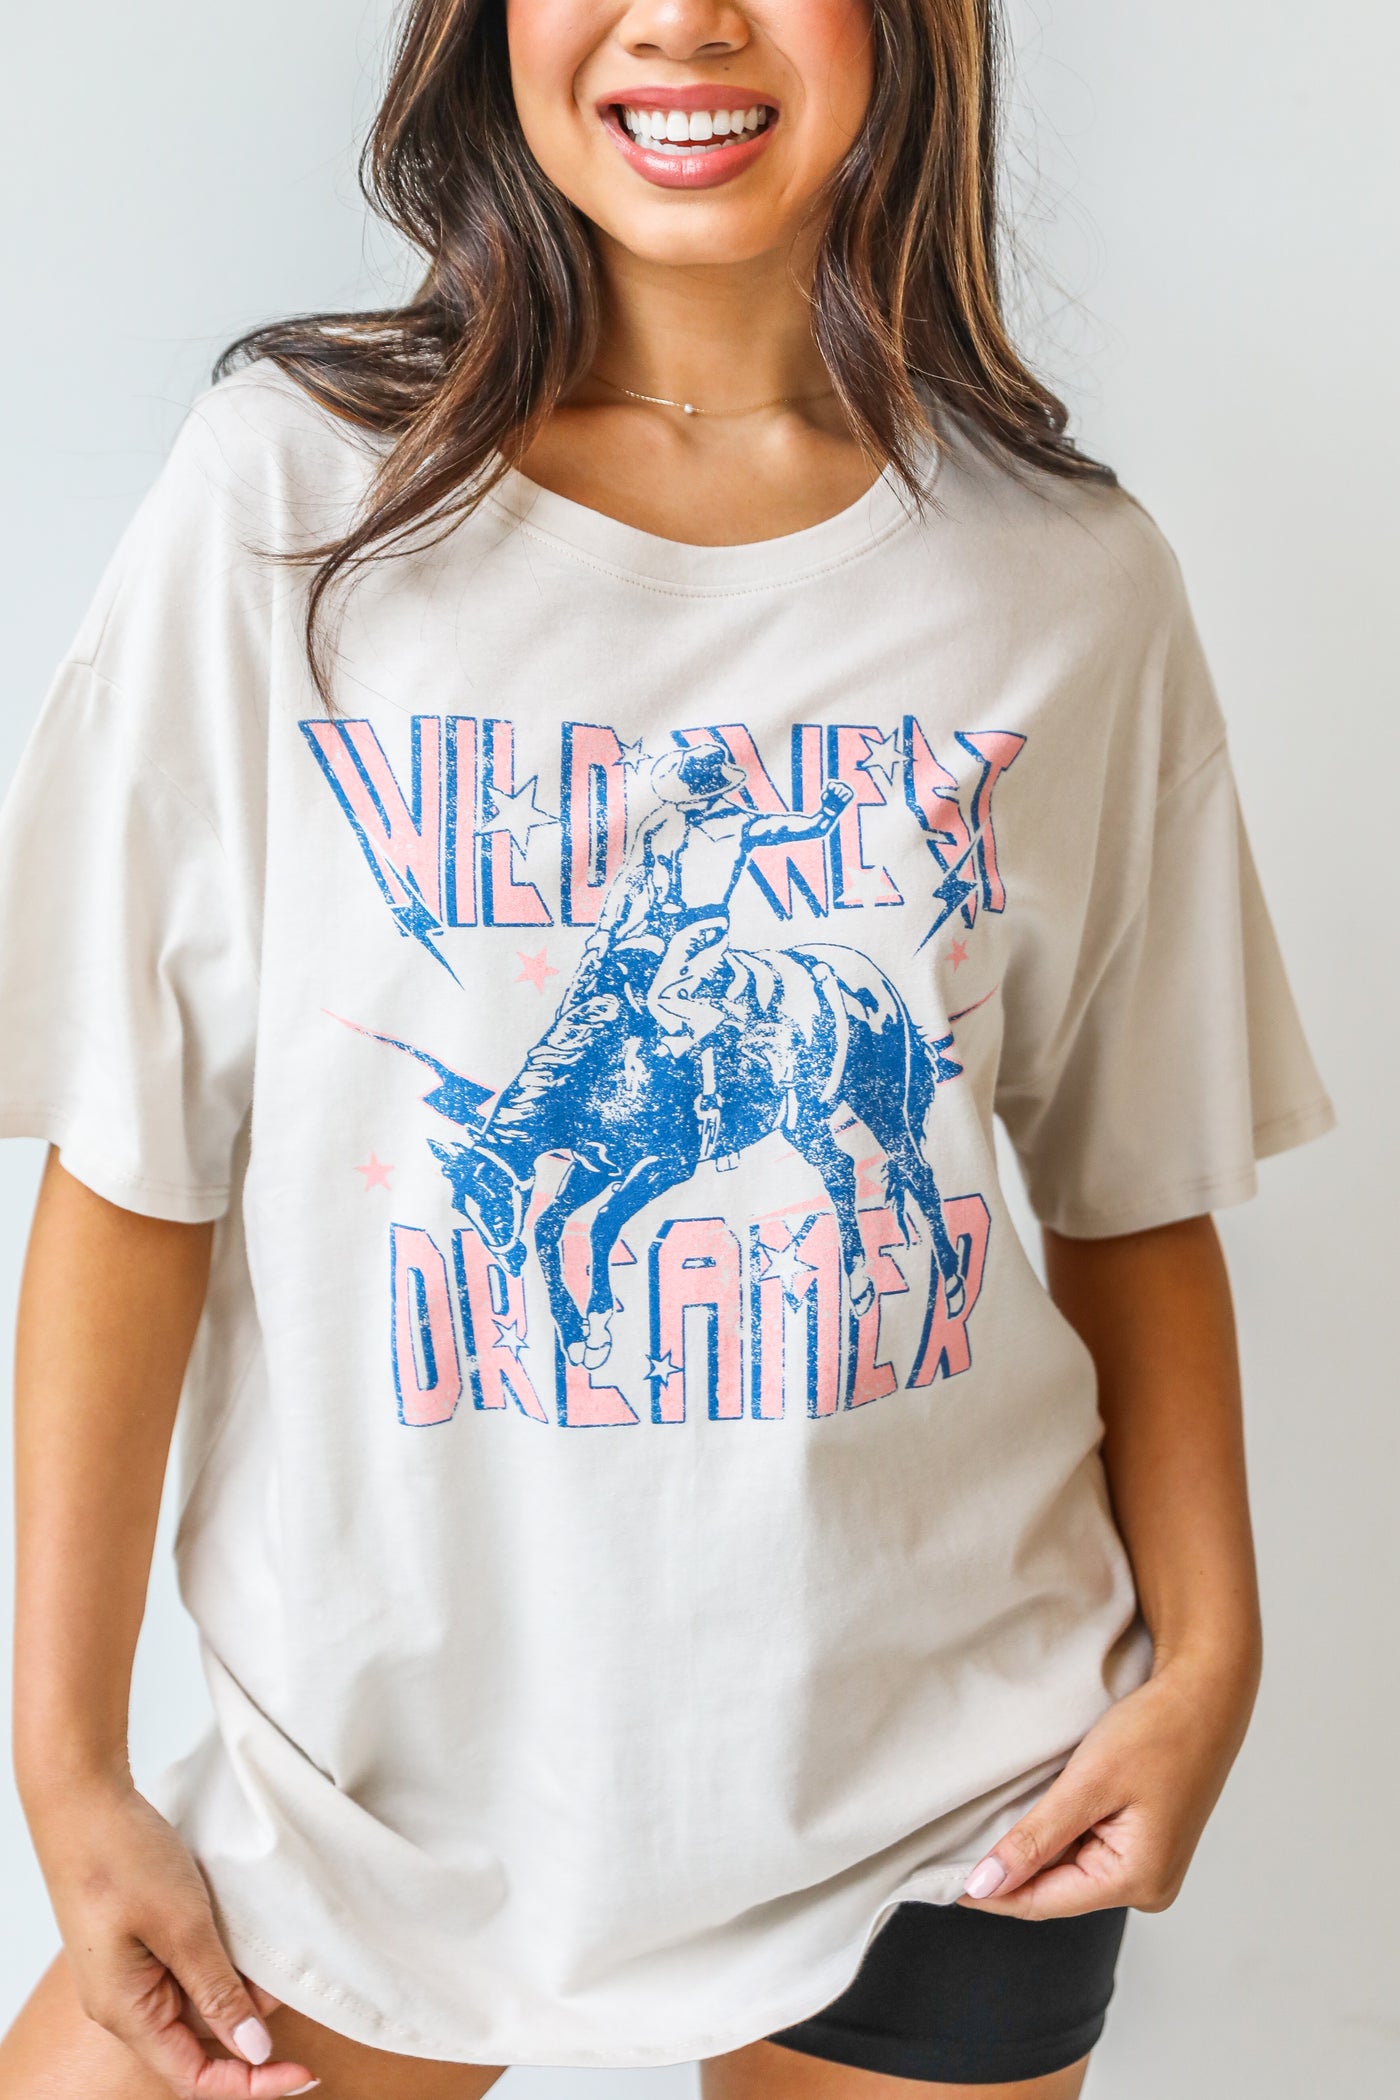 Wild West Dreamer Graphic Tee on model